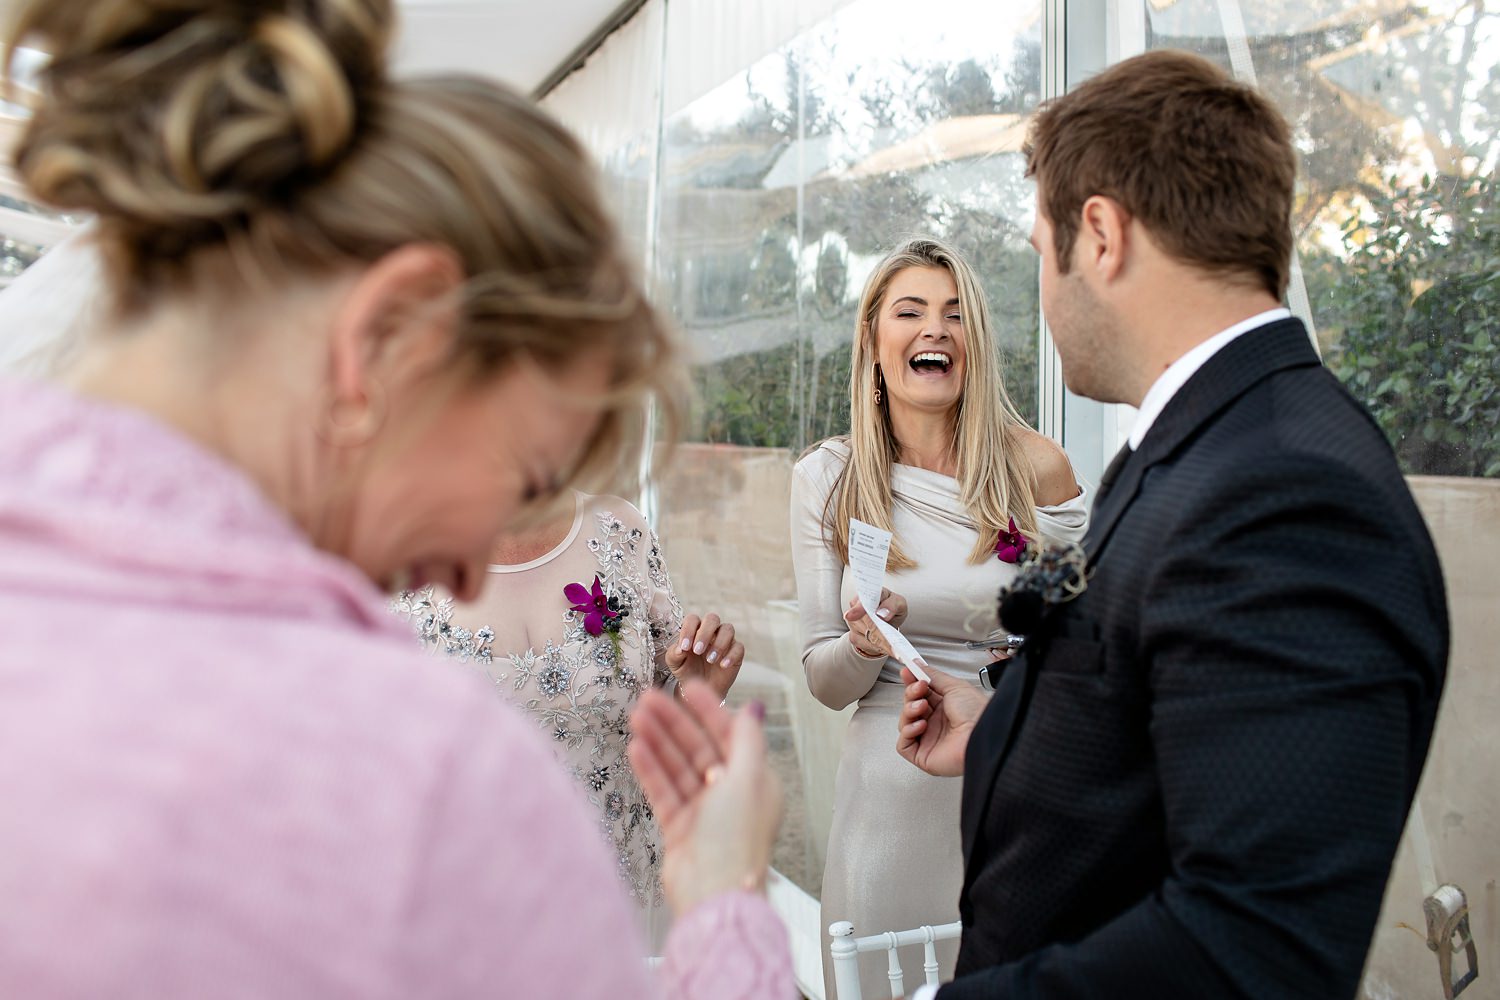 The mother of the groom laughs at her son as he entrusts her with the safekeeping of the wedding certificate by wedding photographer in South Africa, Niki M Photography